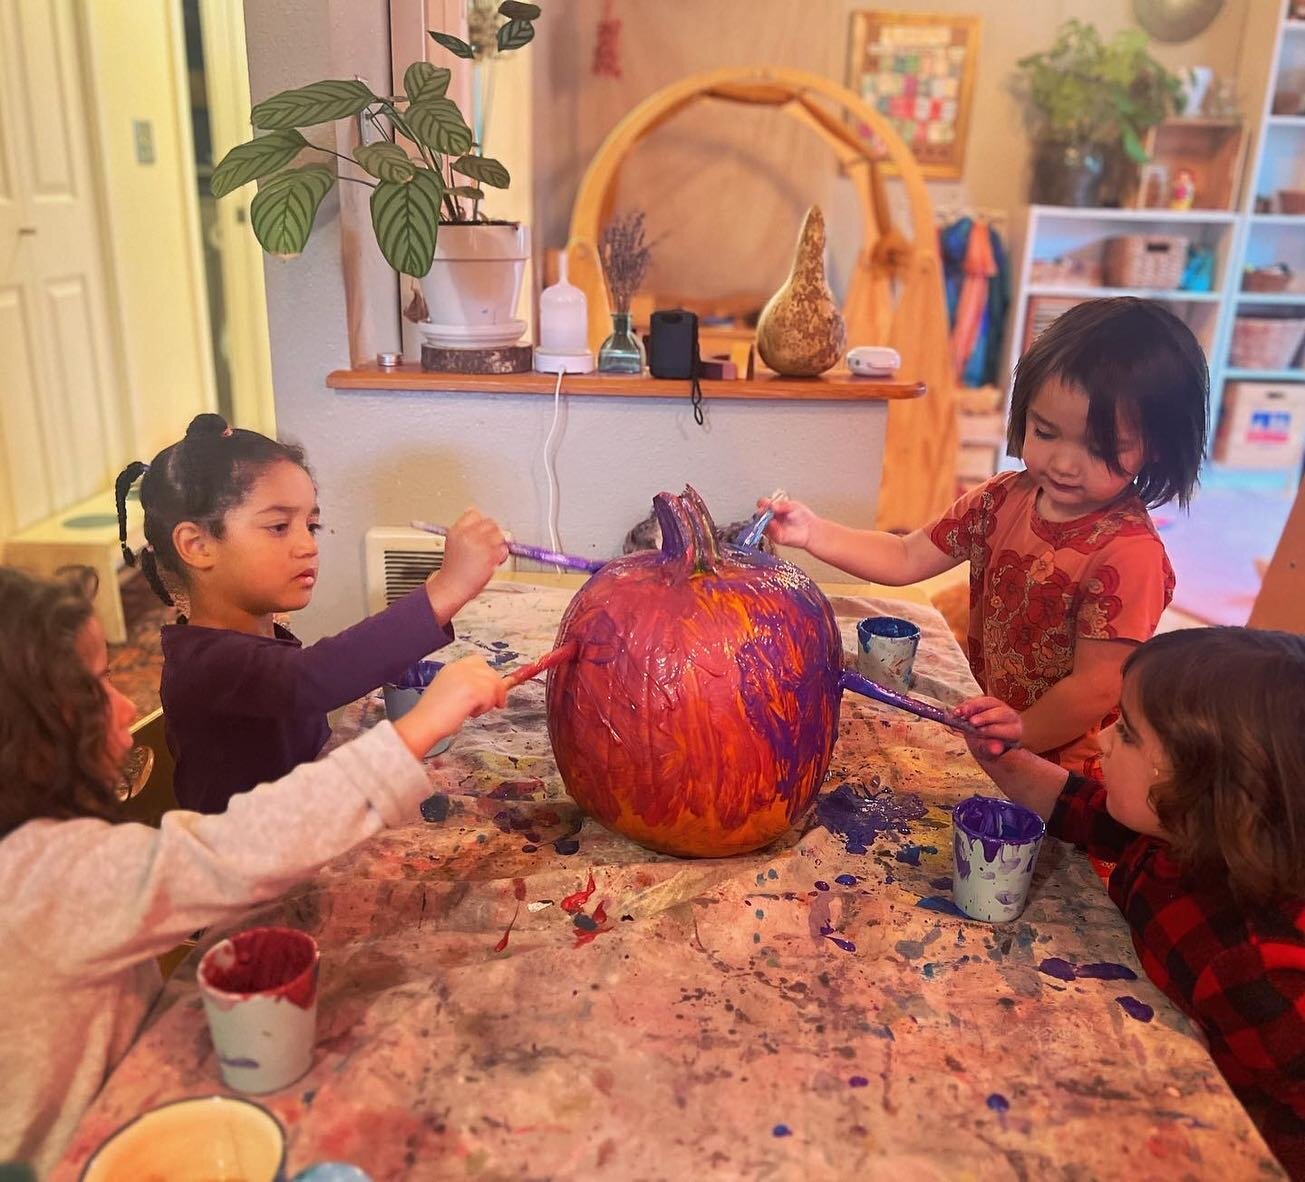 So many pumpkins! We&rsquo;ve painted on them, washed them, glued and decorated them, carved them, baked with them, drummed on them, sang about them and played games with them. So many ways to explore the pumpkin 🎃☺️